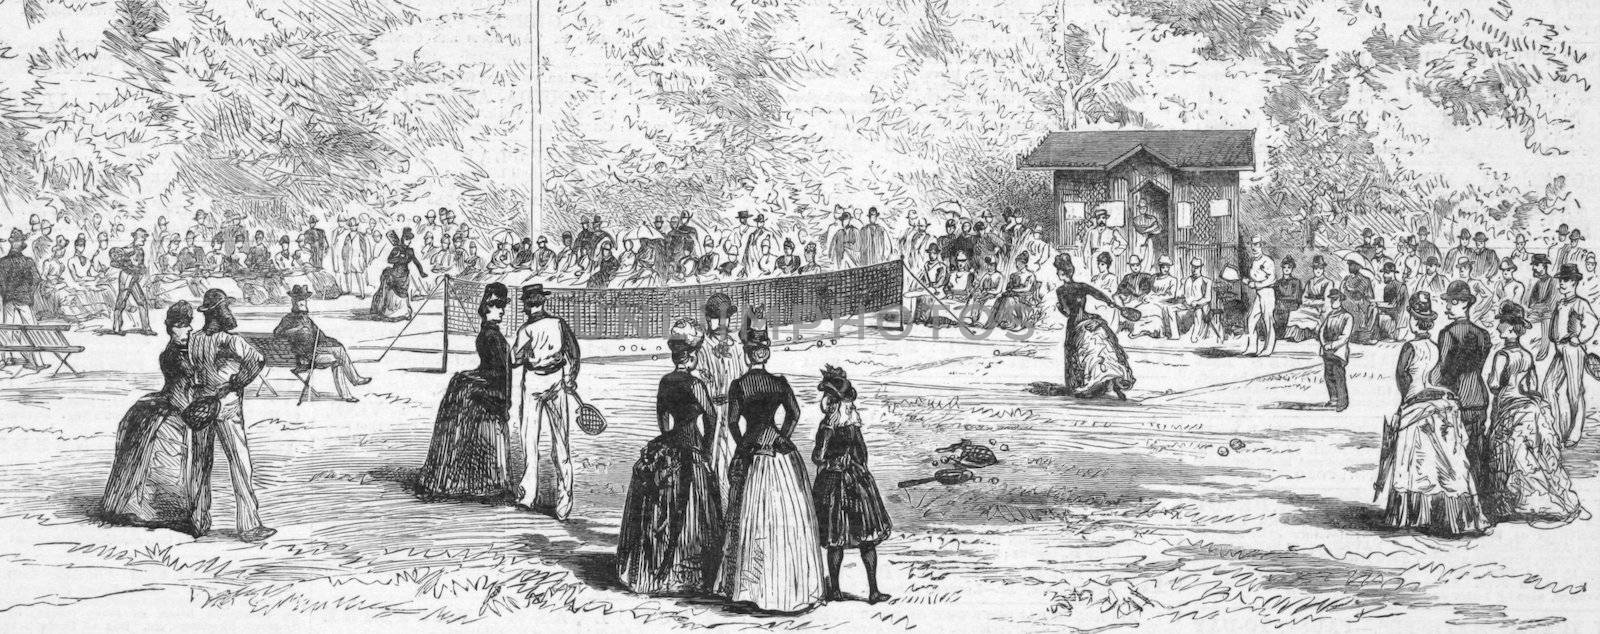 19th Century Tennis in Homburg, Germany on engraving from the 1800s. Published by Illustrated London News in 1887.